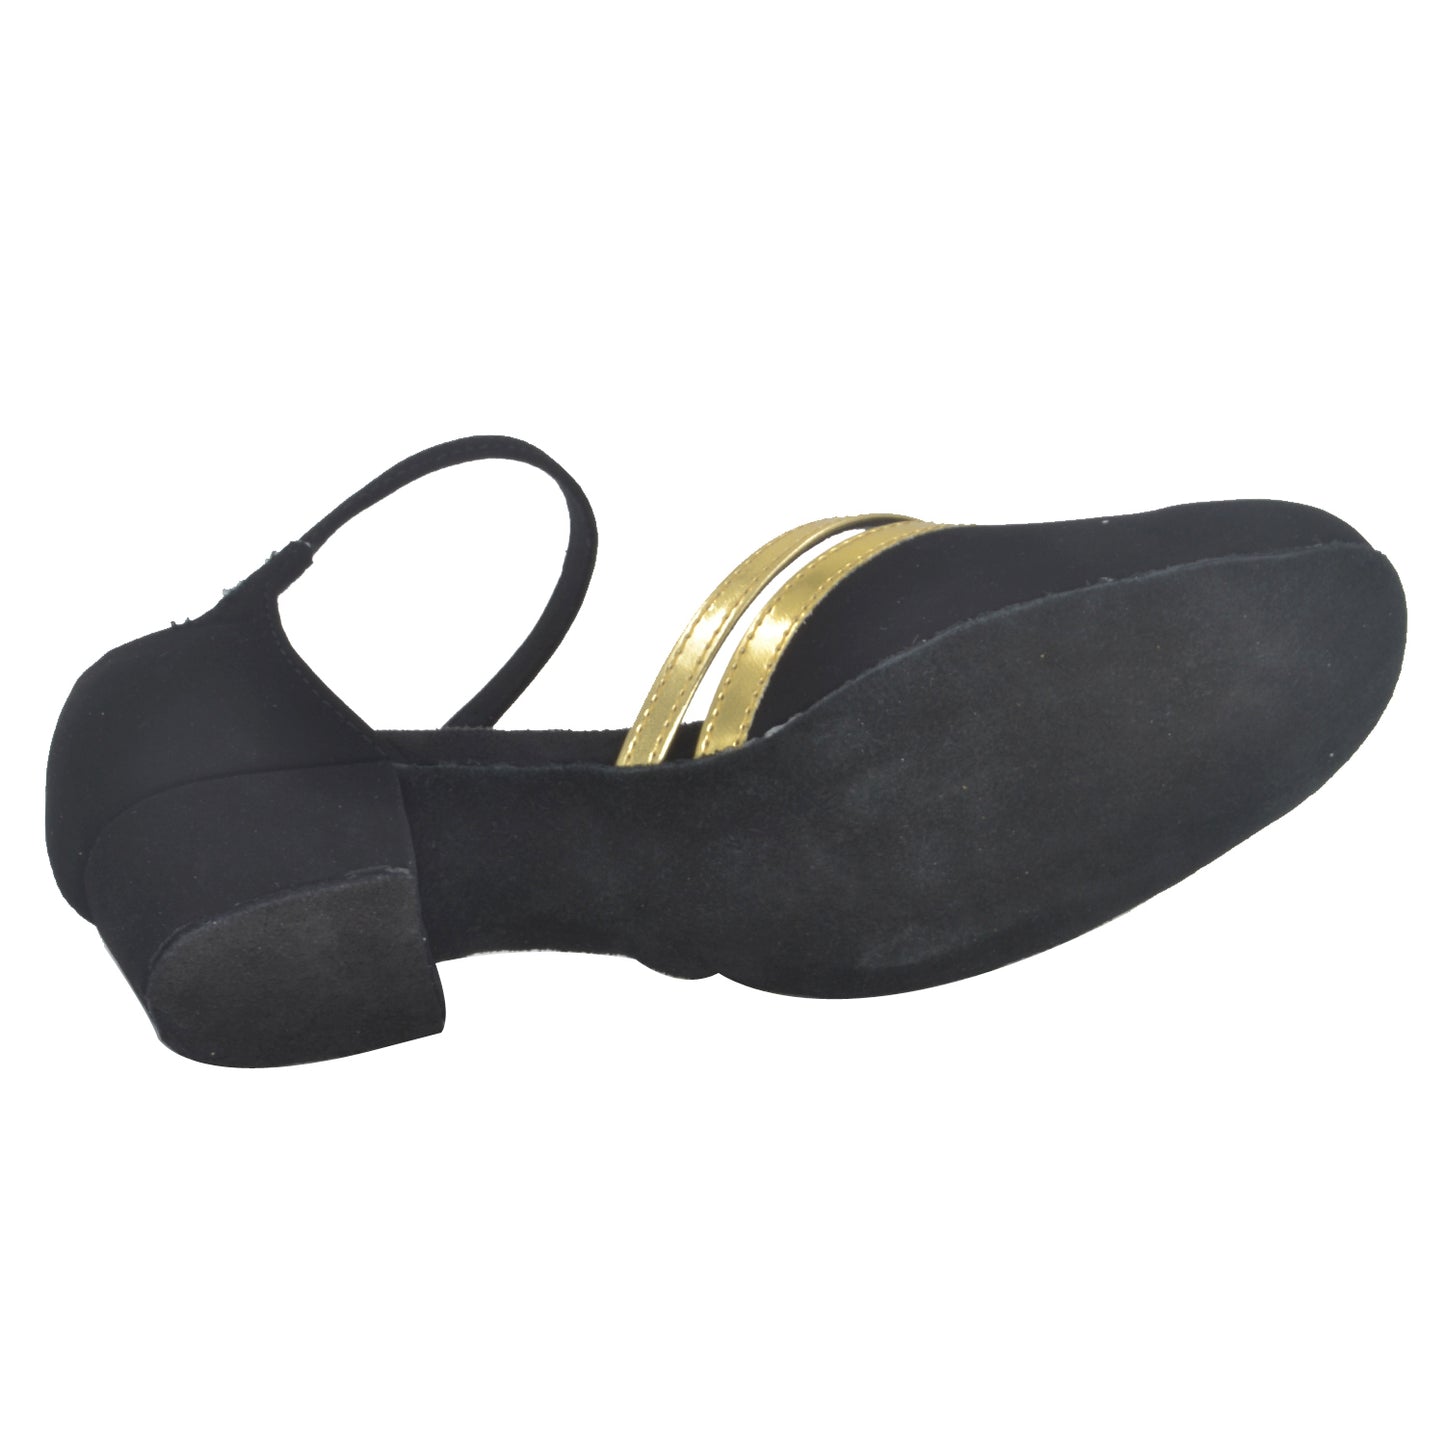 Women Ballroom Dancing Shoes Ladies Tango Latin Practice Dance Shoe Suede Sole Buckle-up Closed-toe Black and Gold (PD8881C)